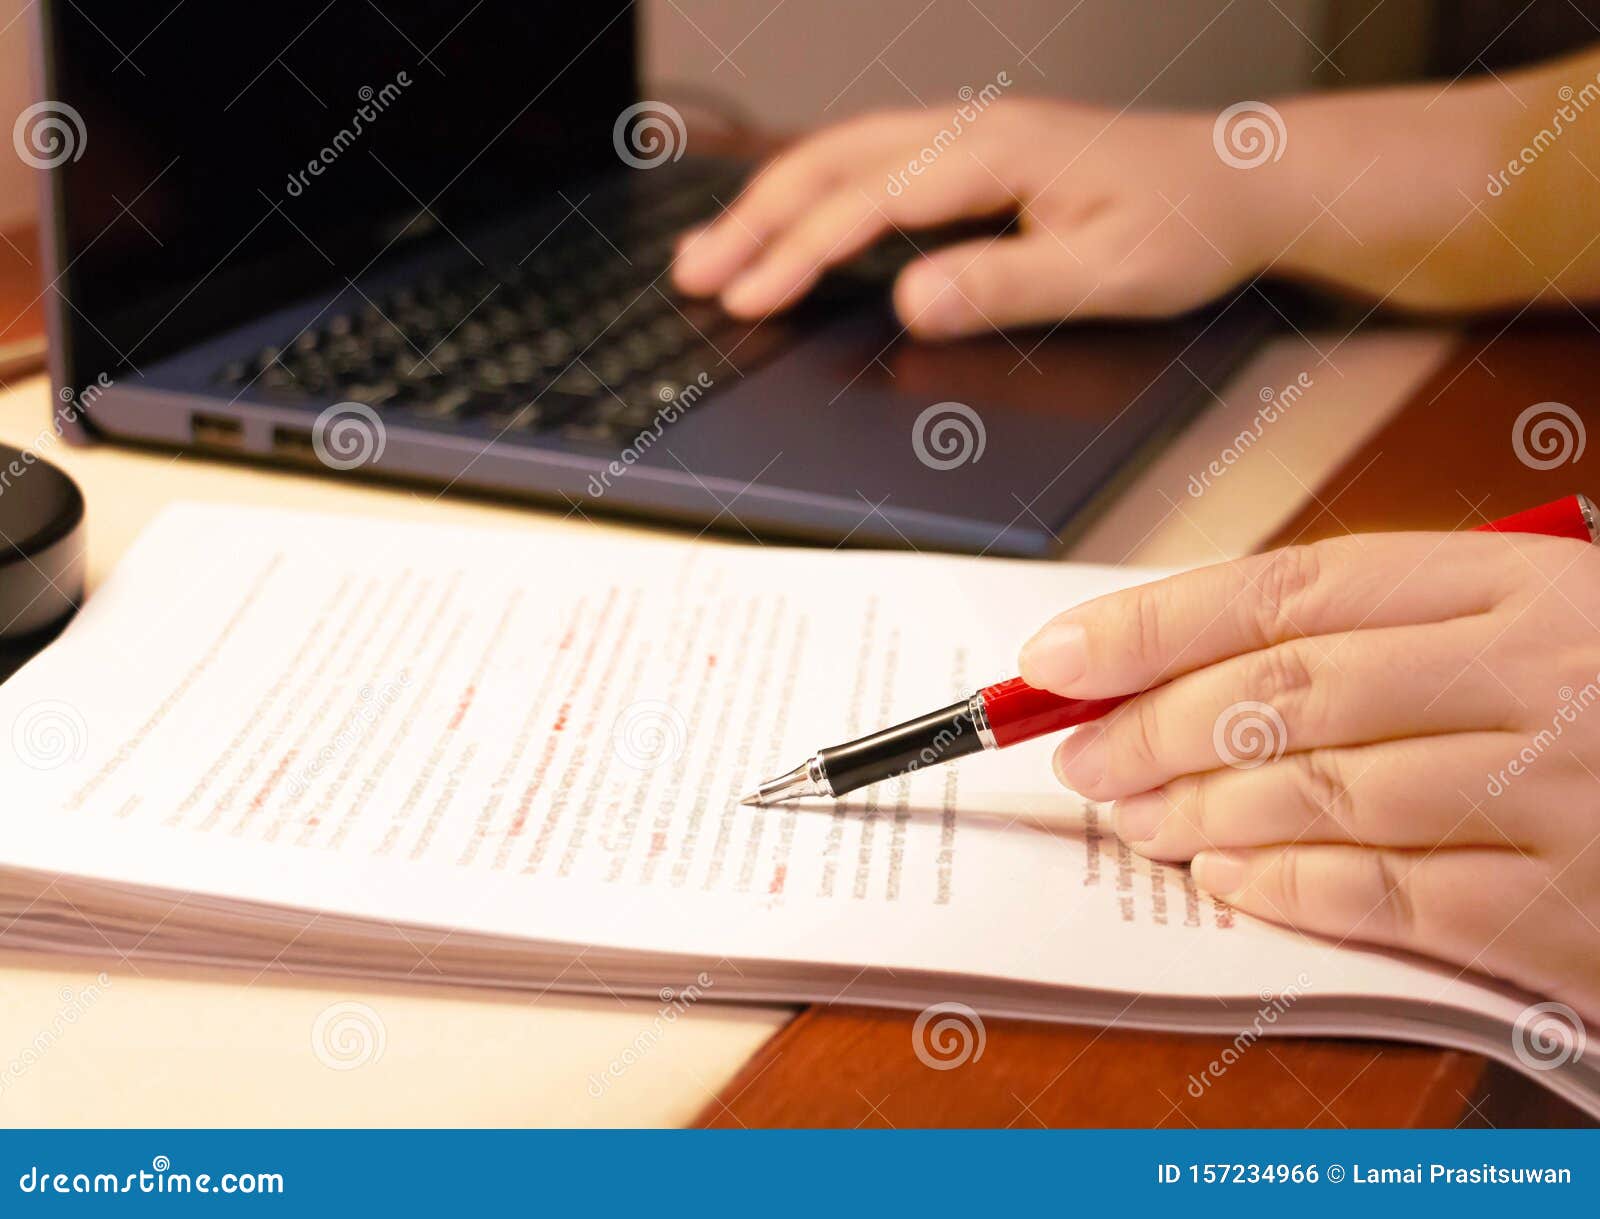 Blur Proofreading  Paper  On Table Stock Photo Image of 